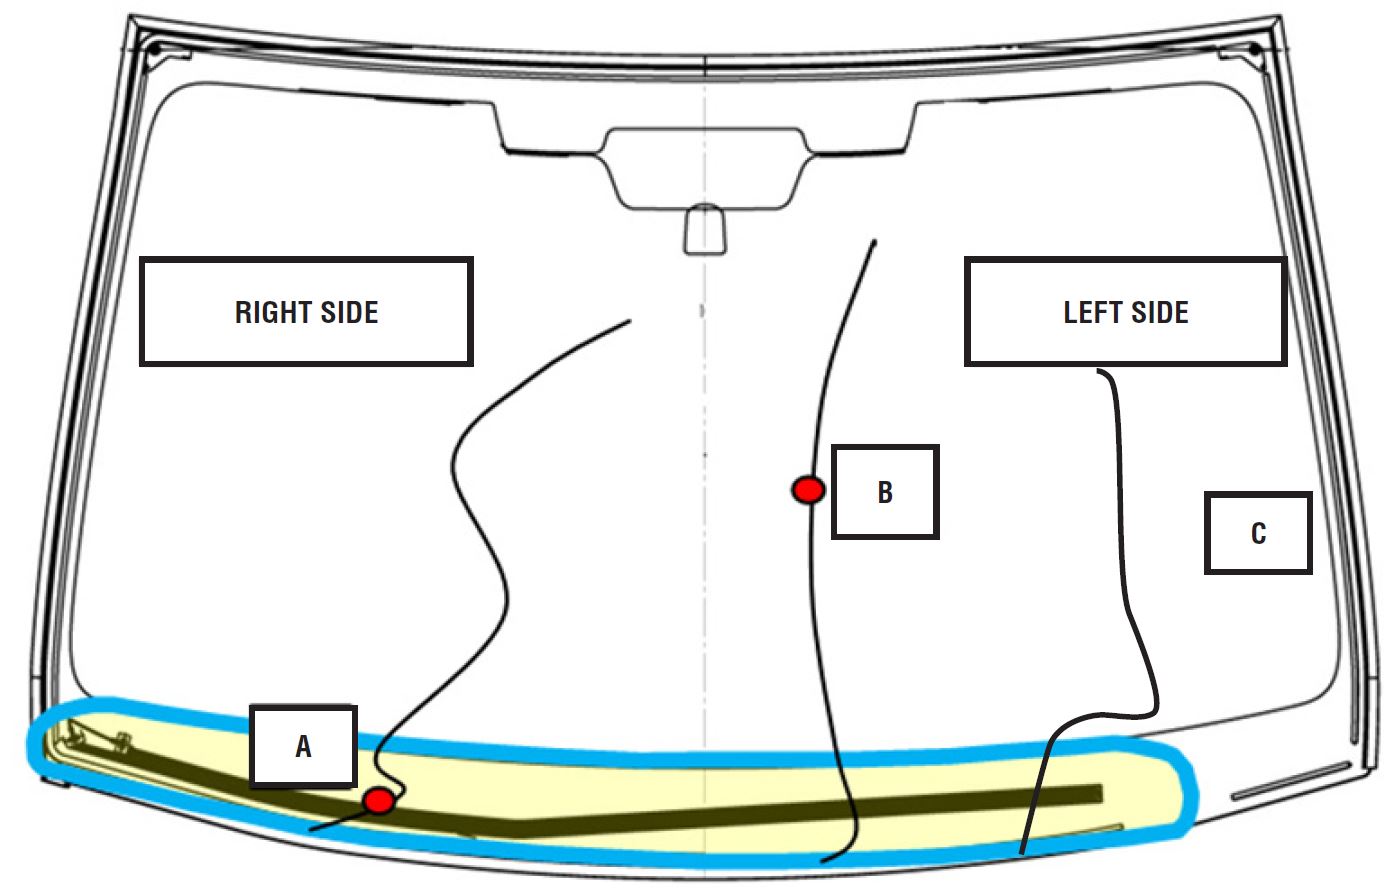 affected deicer area as shown by “A”